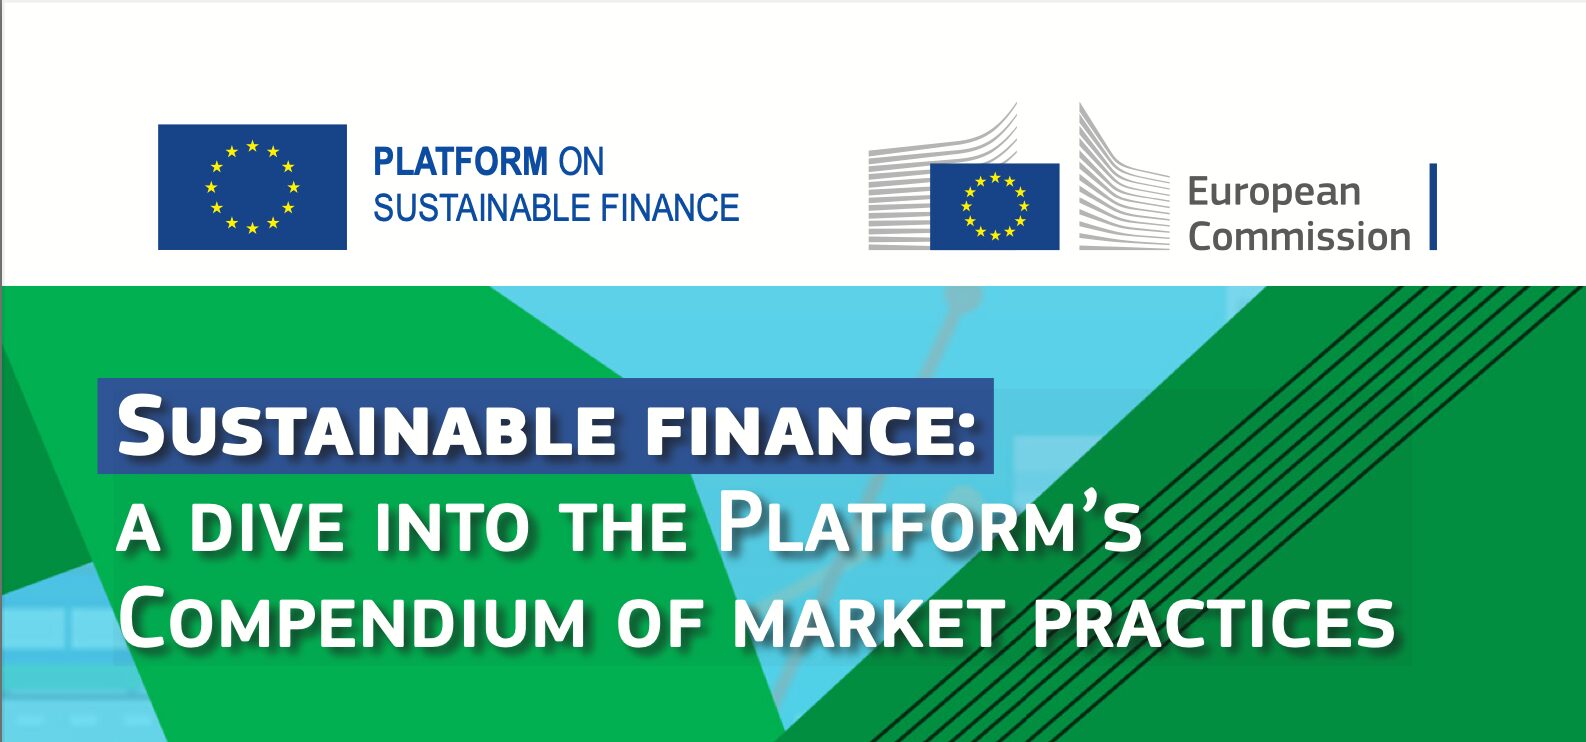 EC releases report on compendium of market practices for sustainable finance.